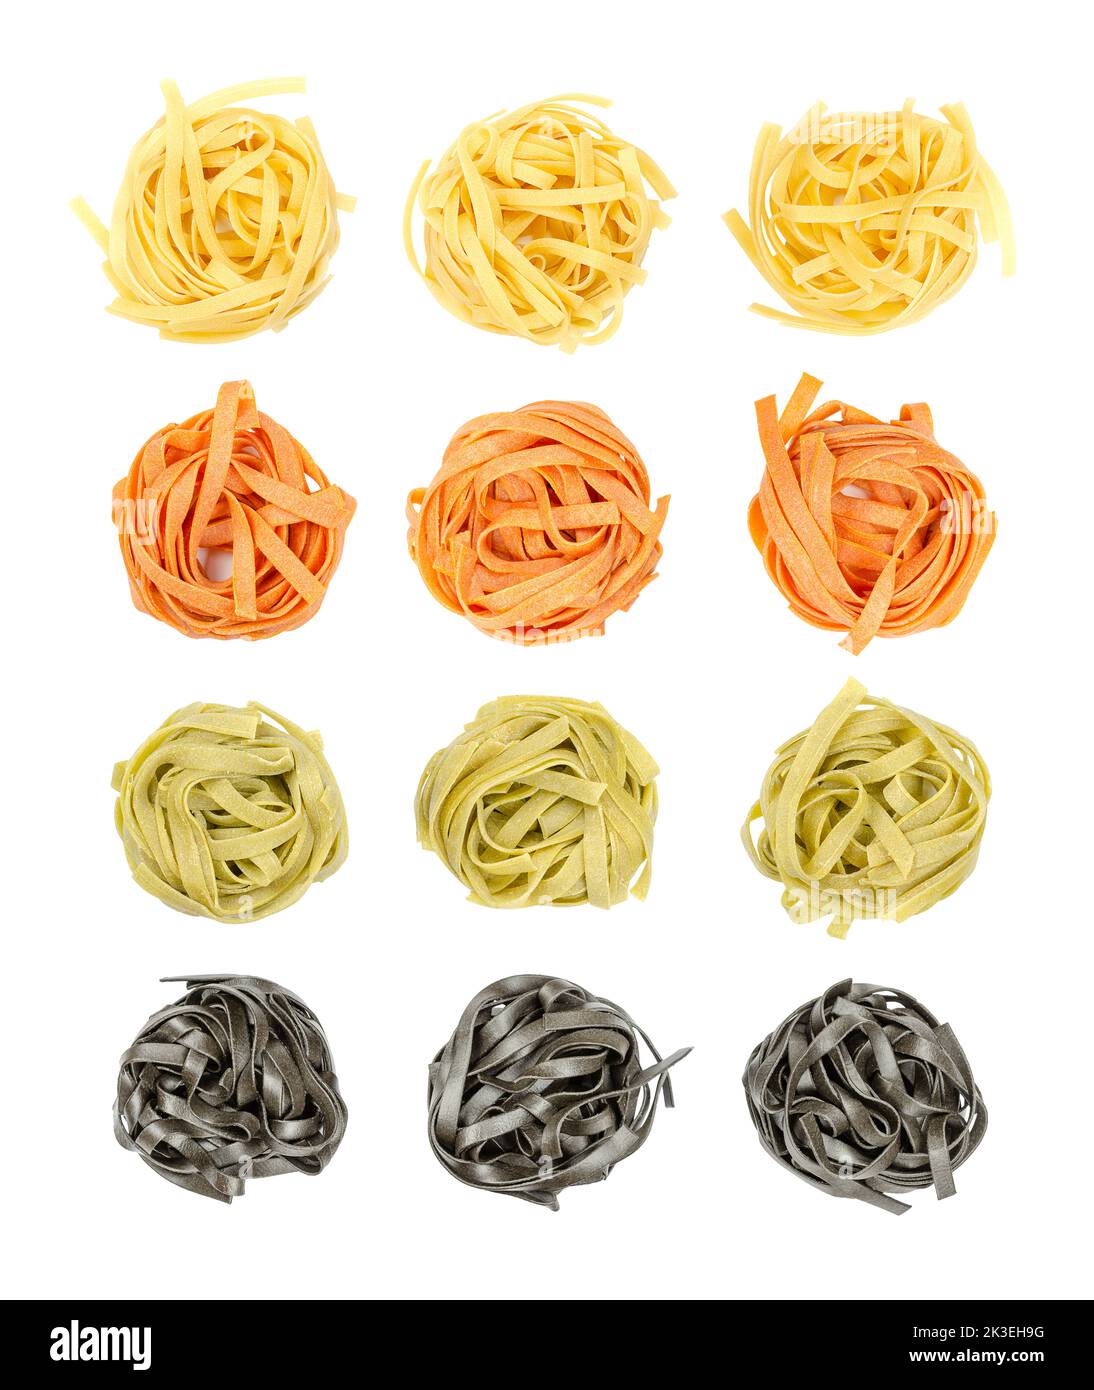 Colored tagliatelle pasta, twisted into nests, from above, isolated over white. Four rows of uncooked, dried traditional Italian egg pasta. Stock Photo